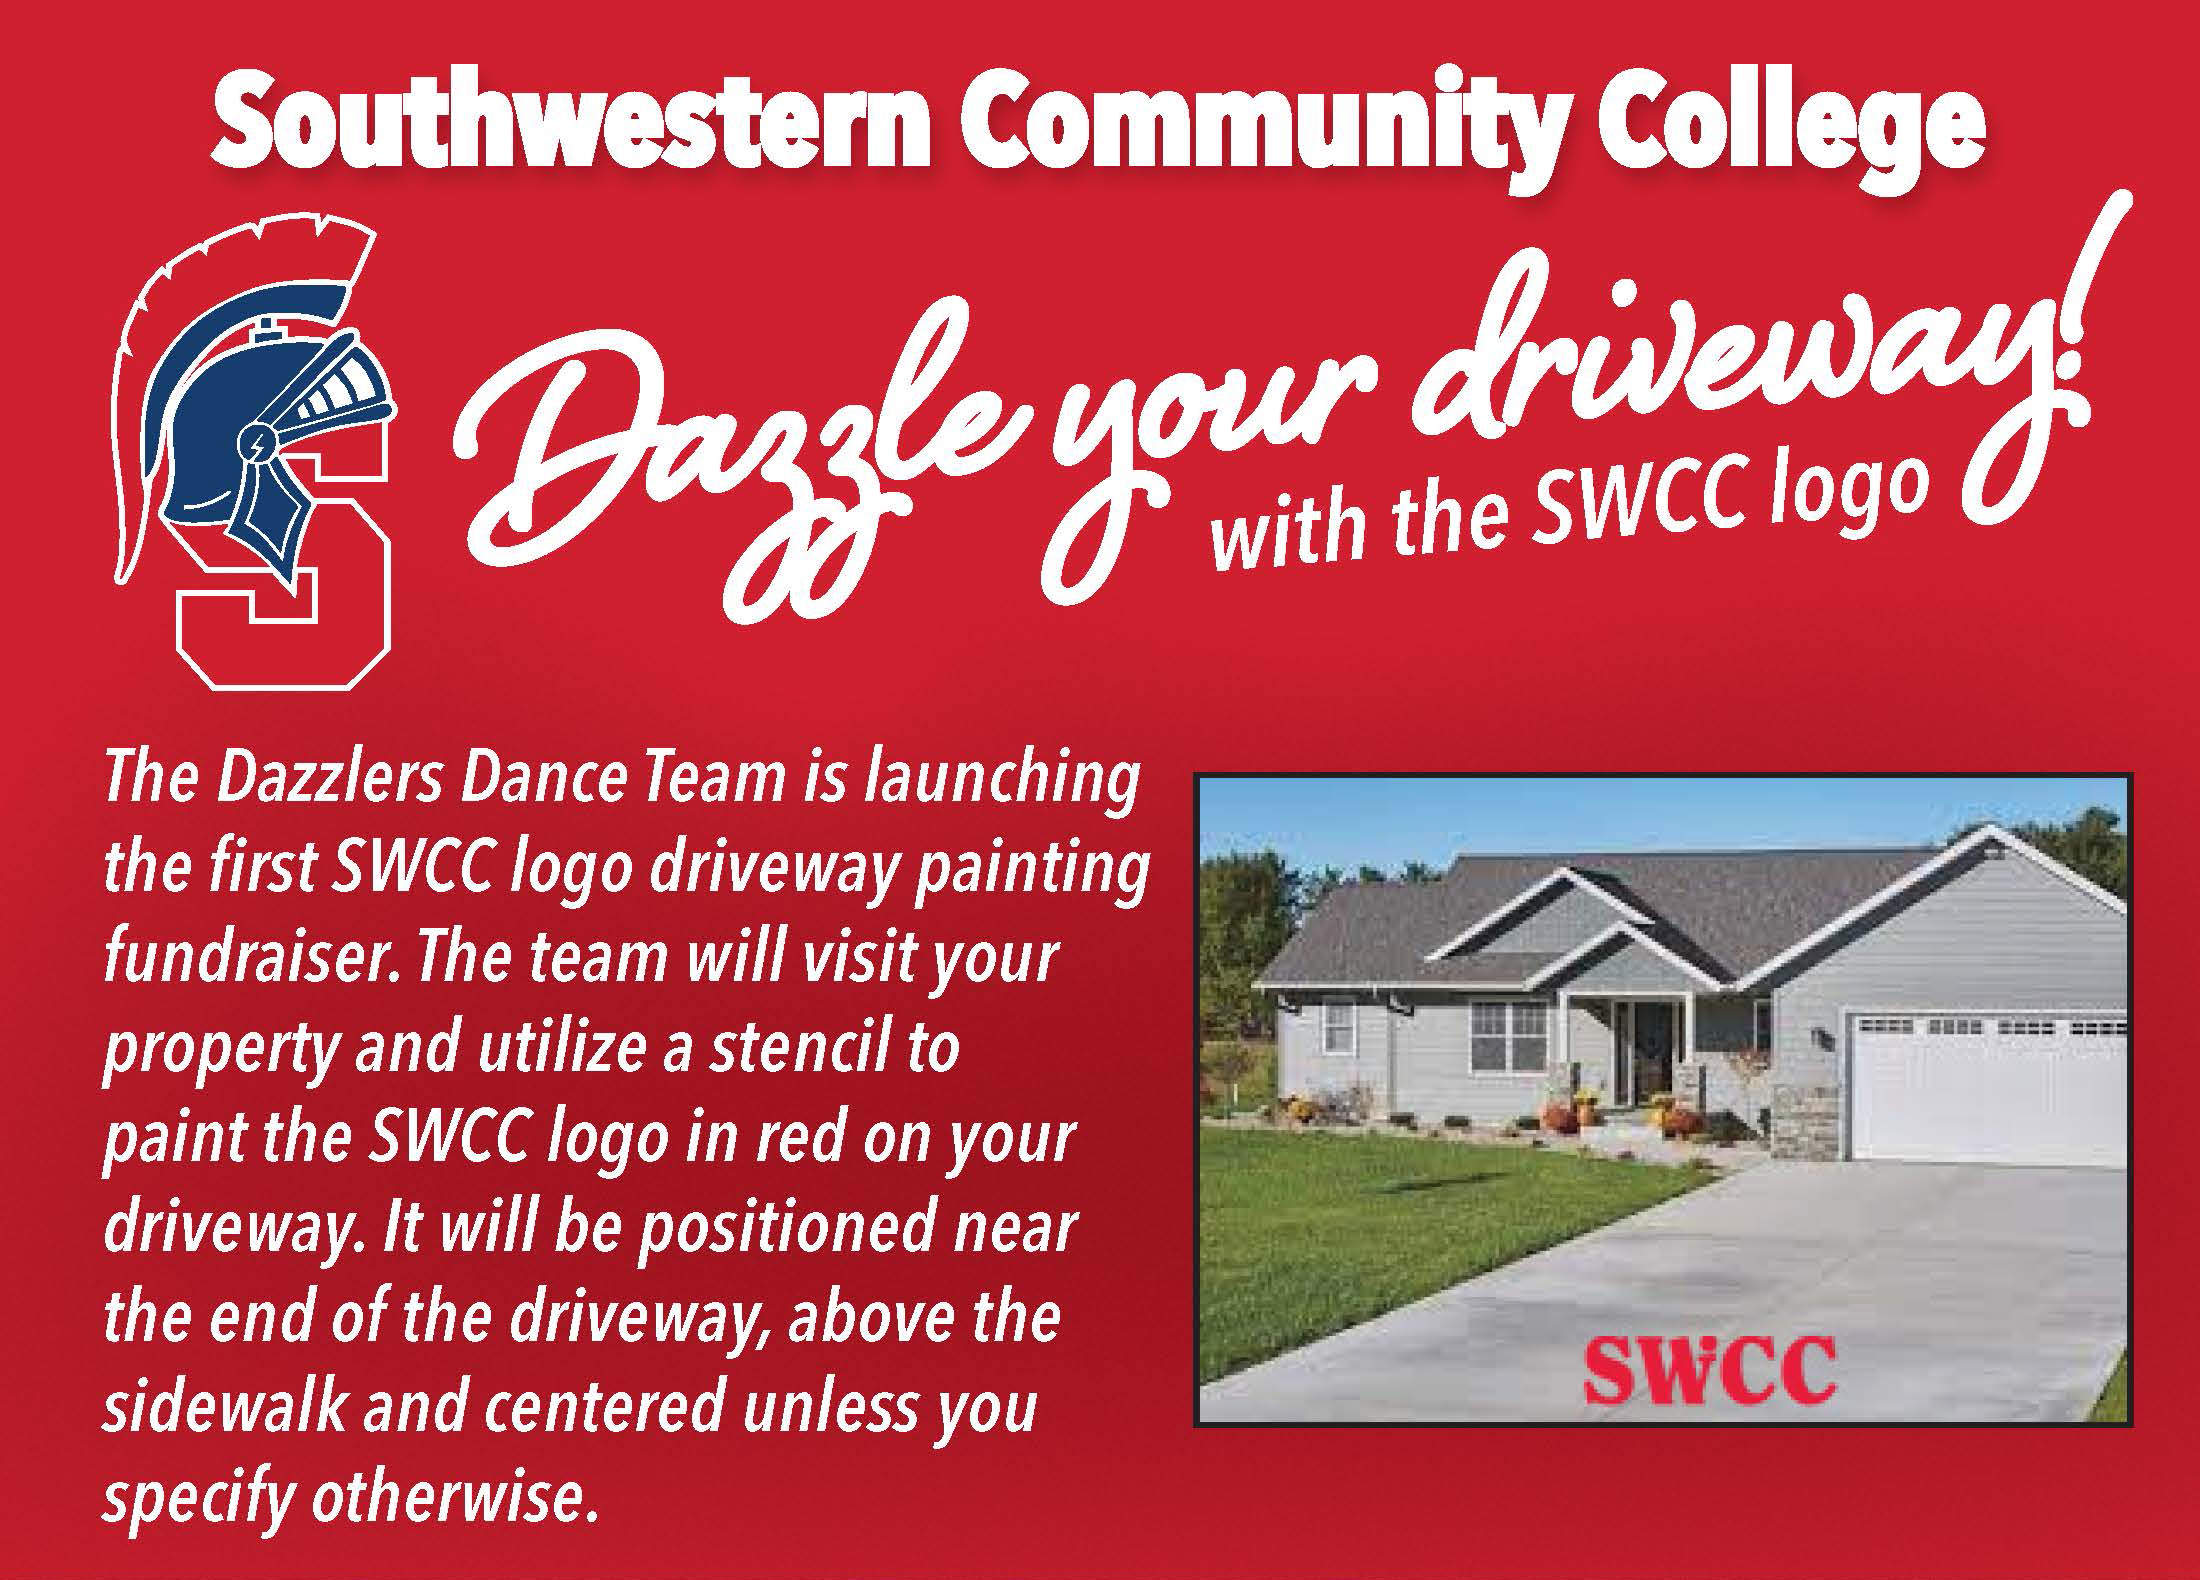 Photo of house with SWCC logo on driveway.